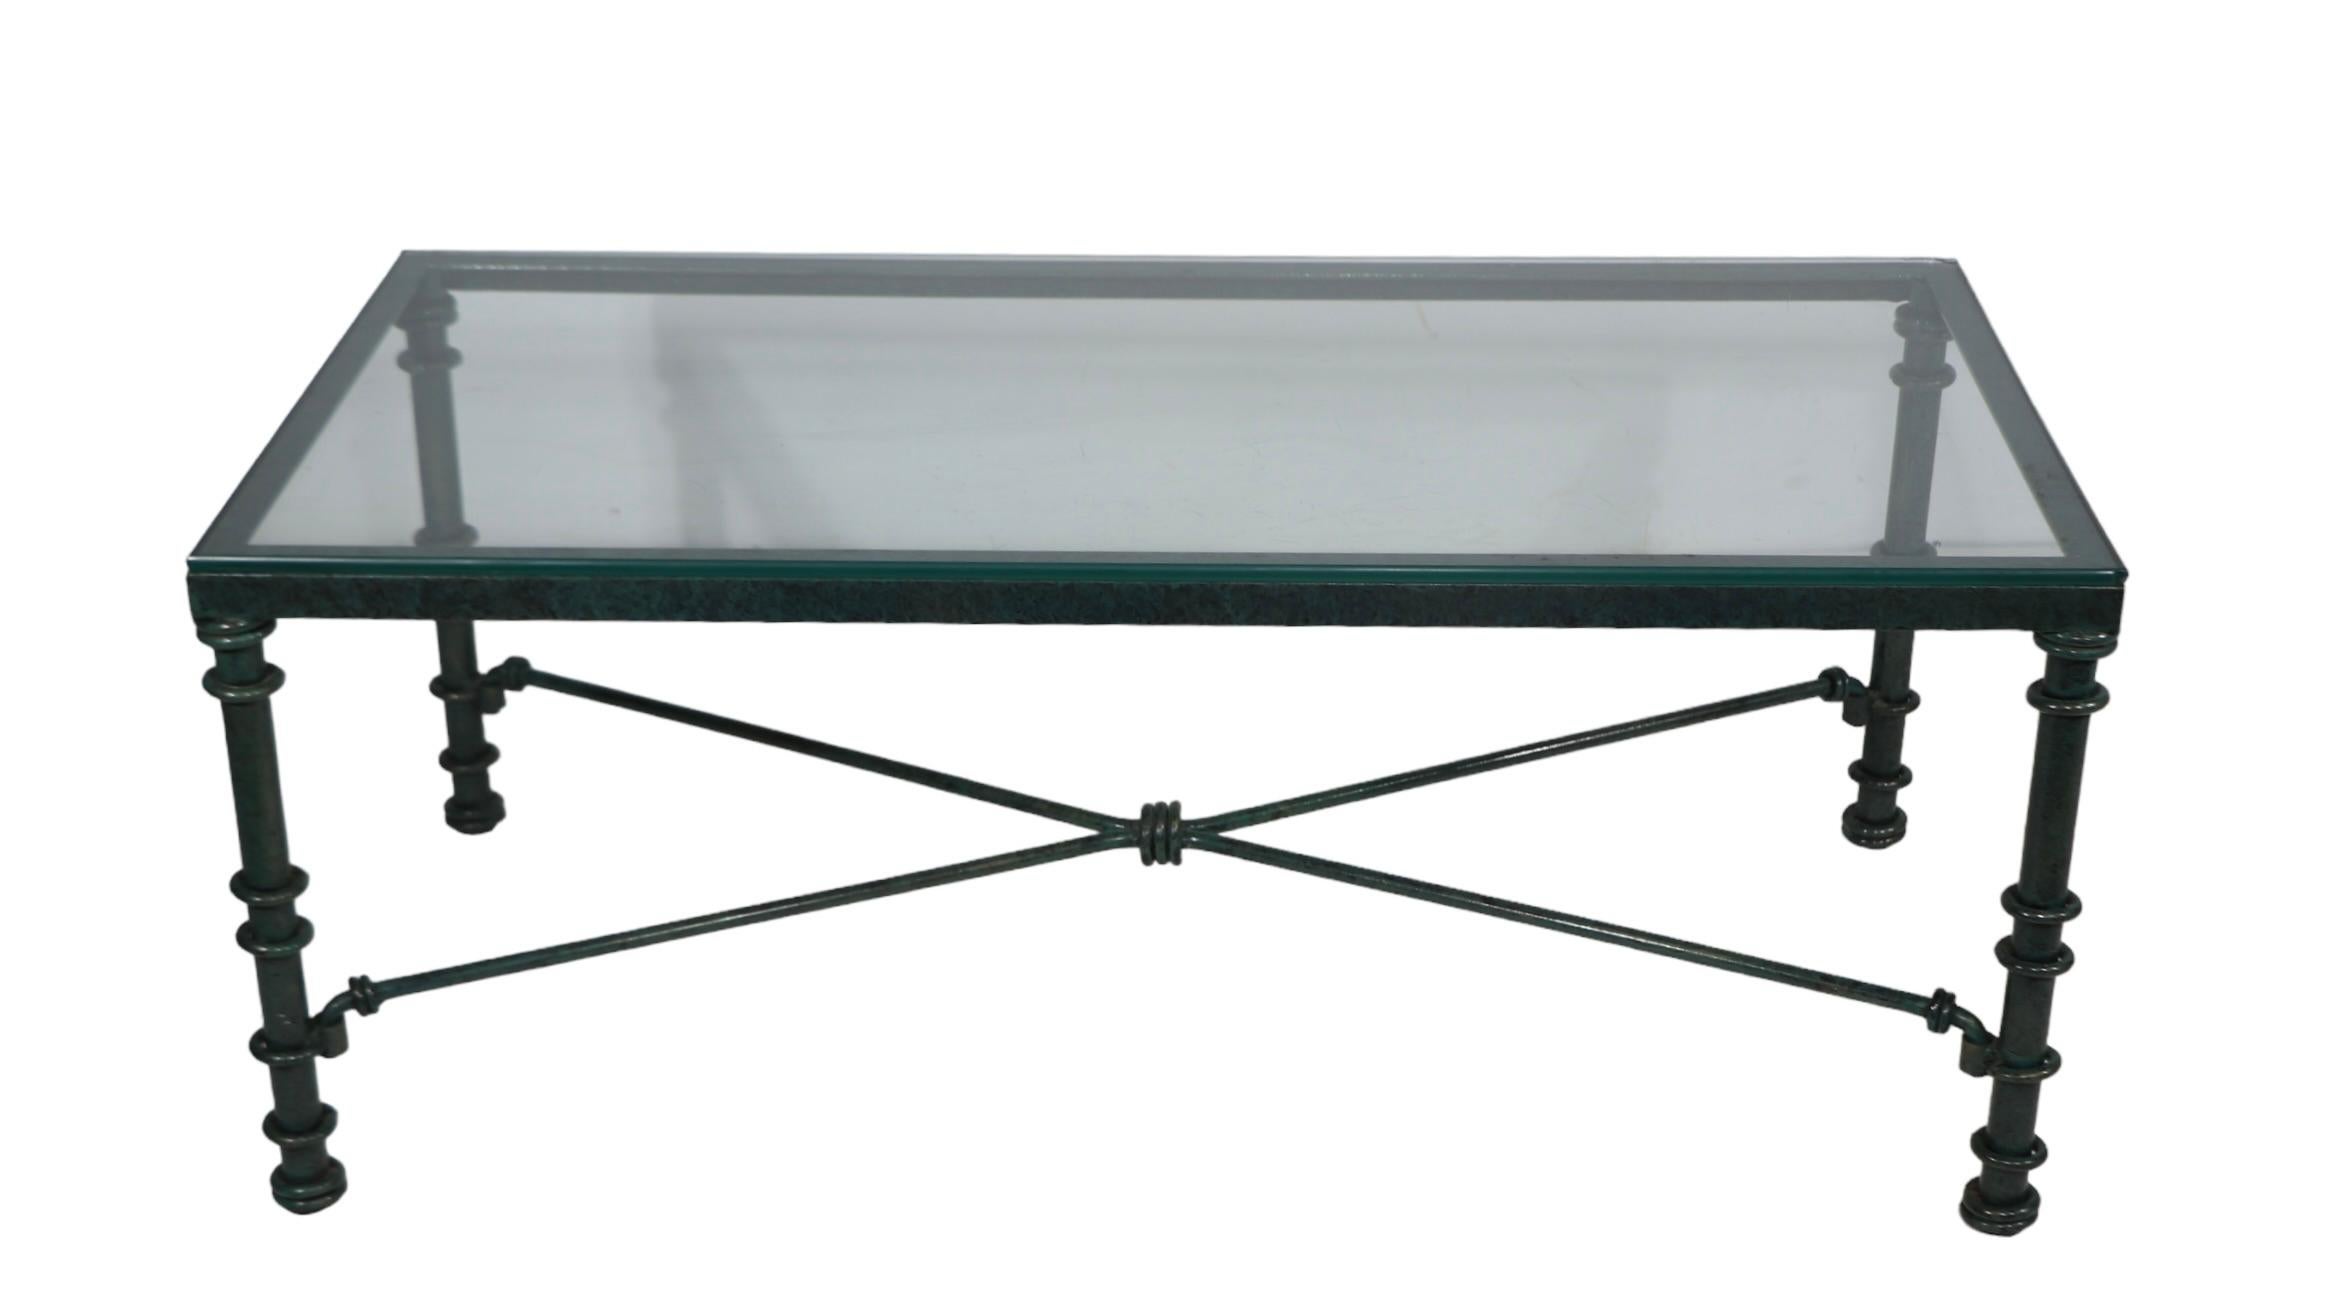 20th Century Brutalist Faux Verdigris Finish Glass Top Coffee Table c. 1970/1980's For Sale